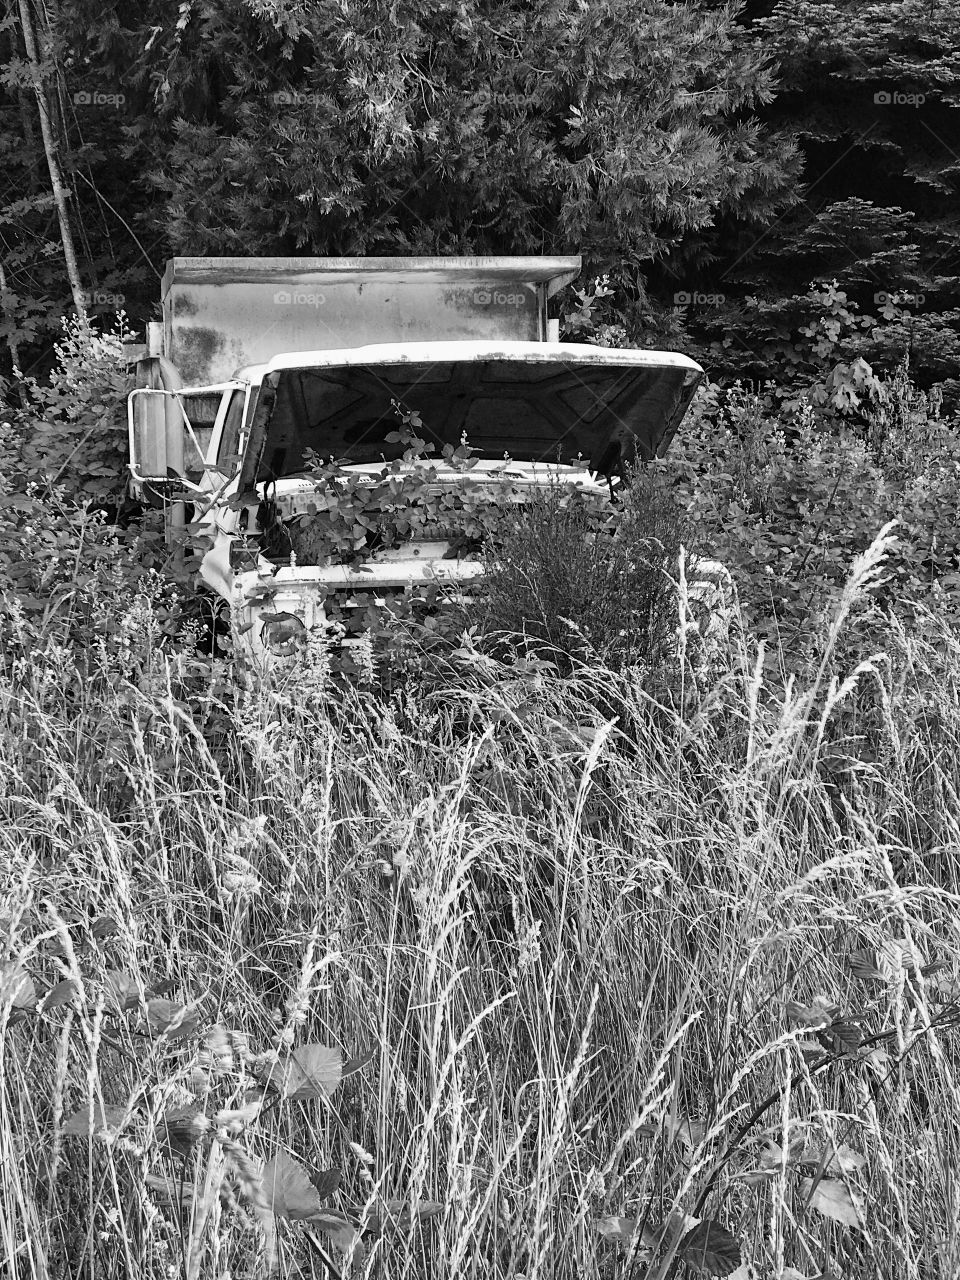 An old abandoned truck lost in time being overgrown by the forest 